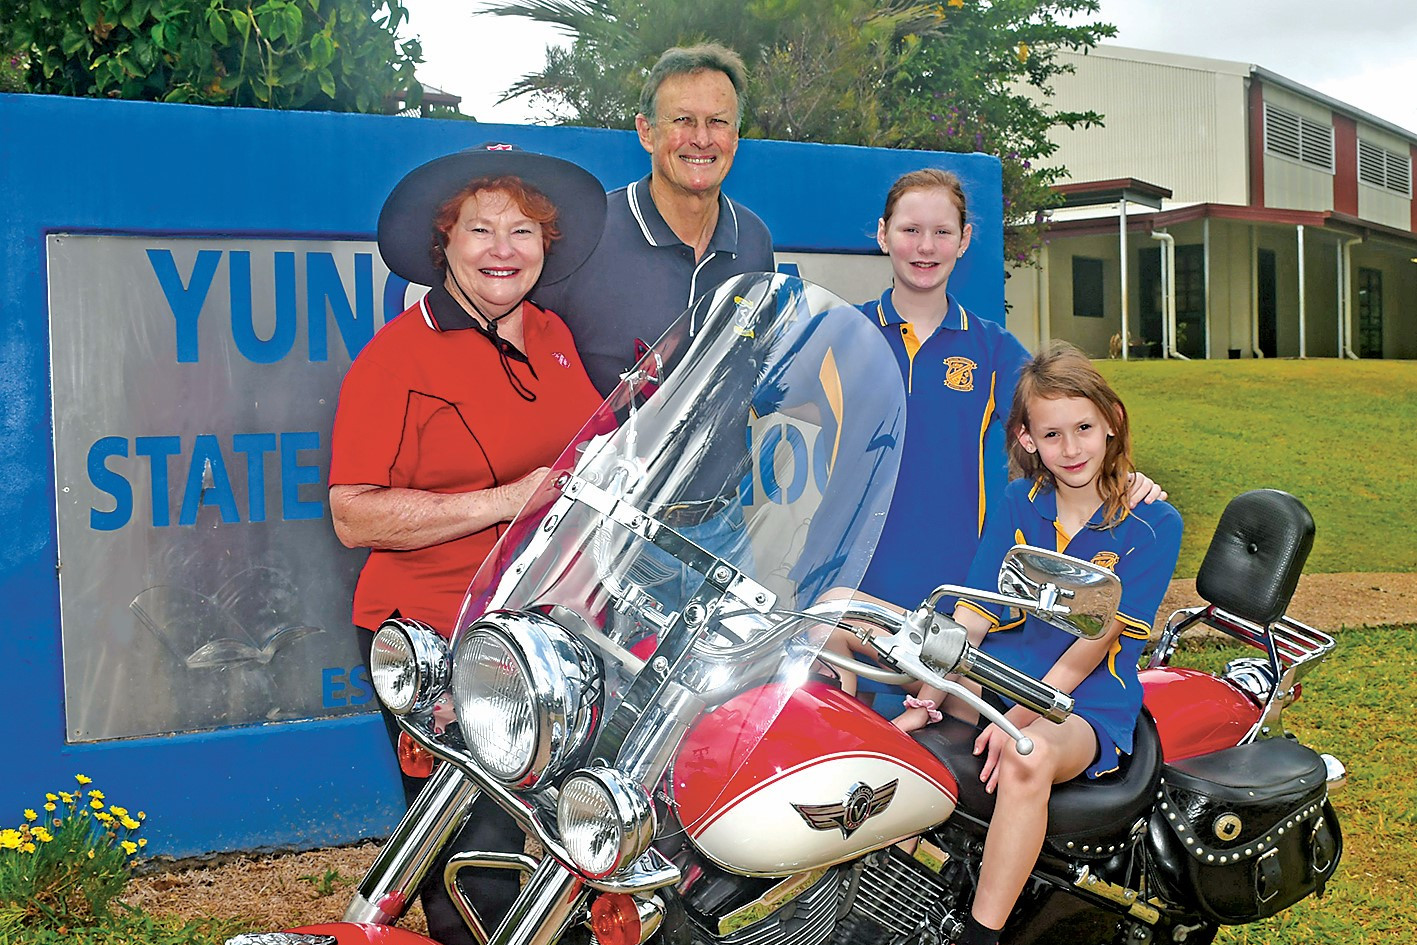 Many motorcycles and cars will feature in this year’s Tablelands Toy Run including this 1996 Kawasaki Vulcan, belonging to Errol Brix. Pictured ready for the run are Jan Delai from the Salvation Army, toy run coordinator Don Sheppard and Yungaburra School students Farrah and Allerak Bolger.